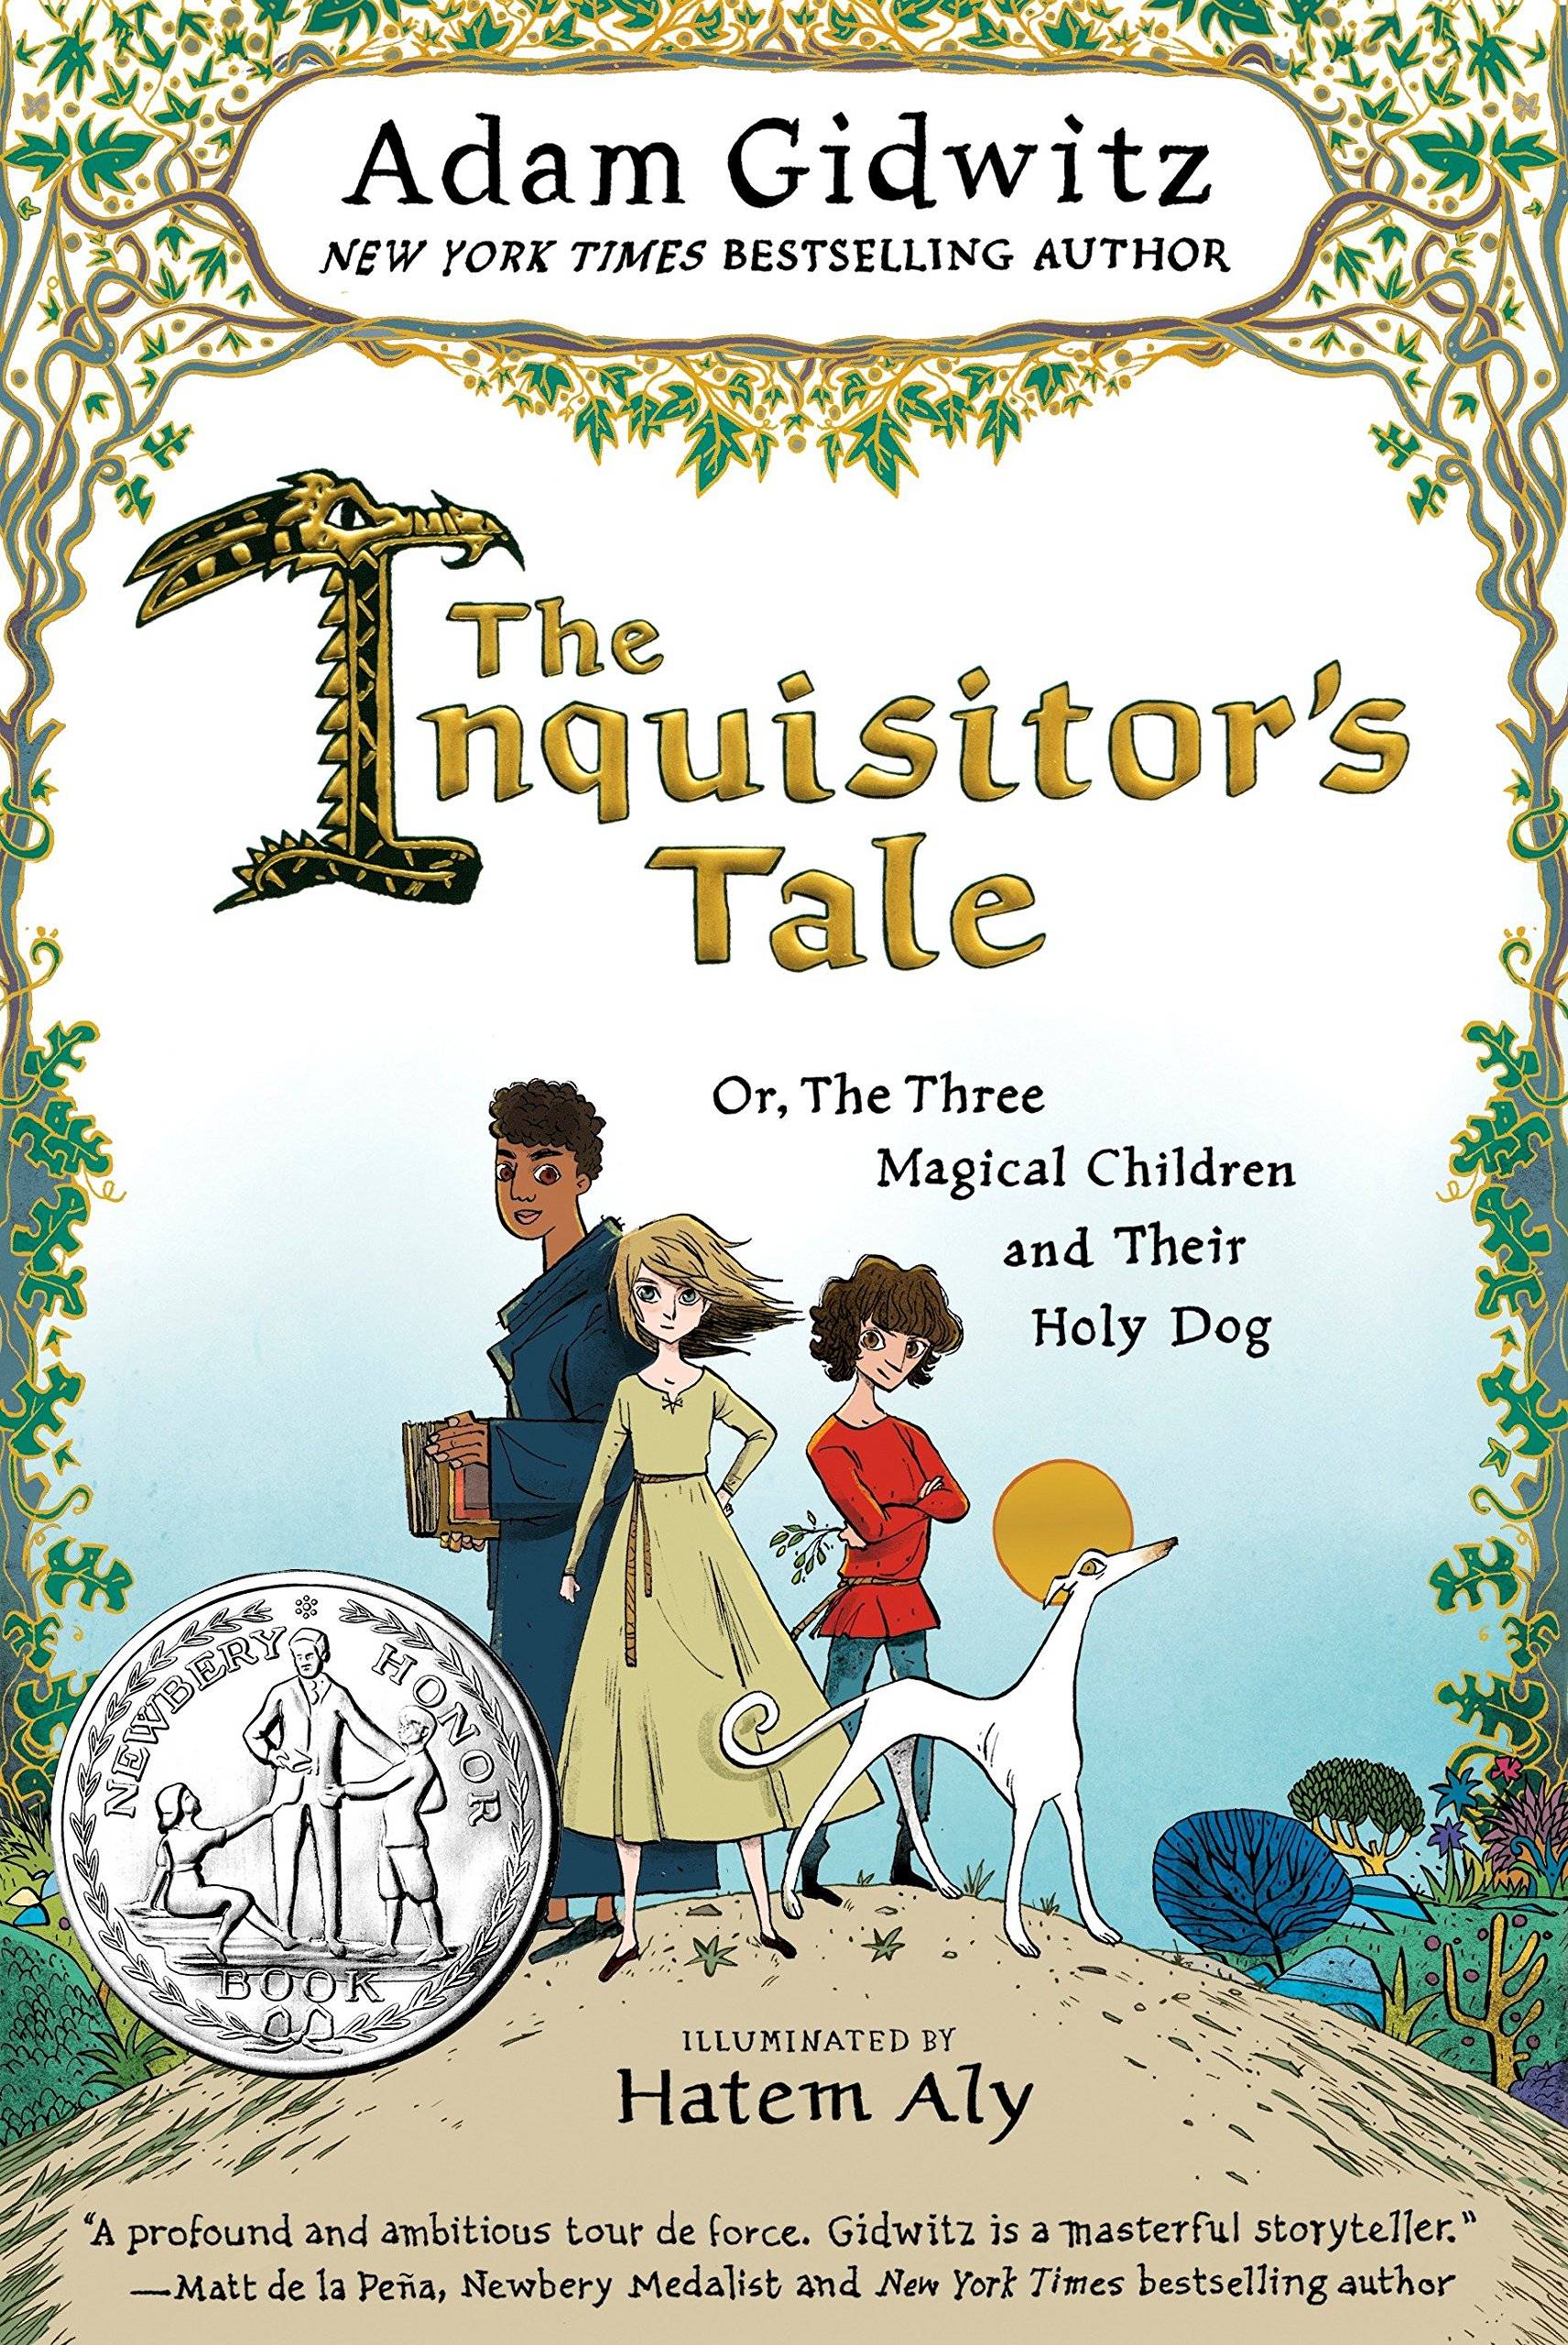 IMG : The Inquisitors Tale